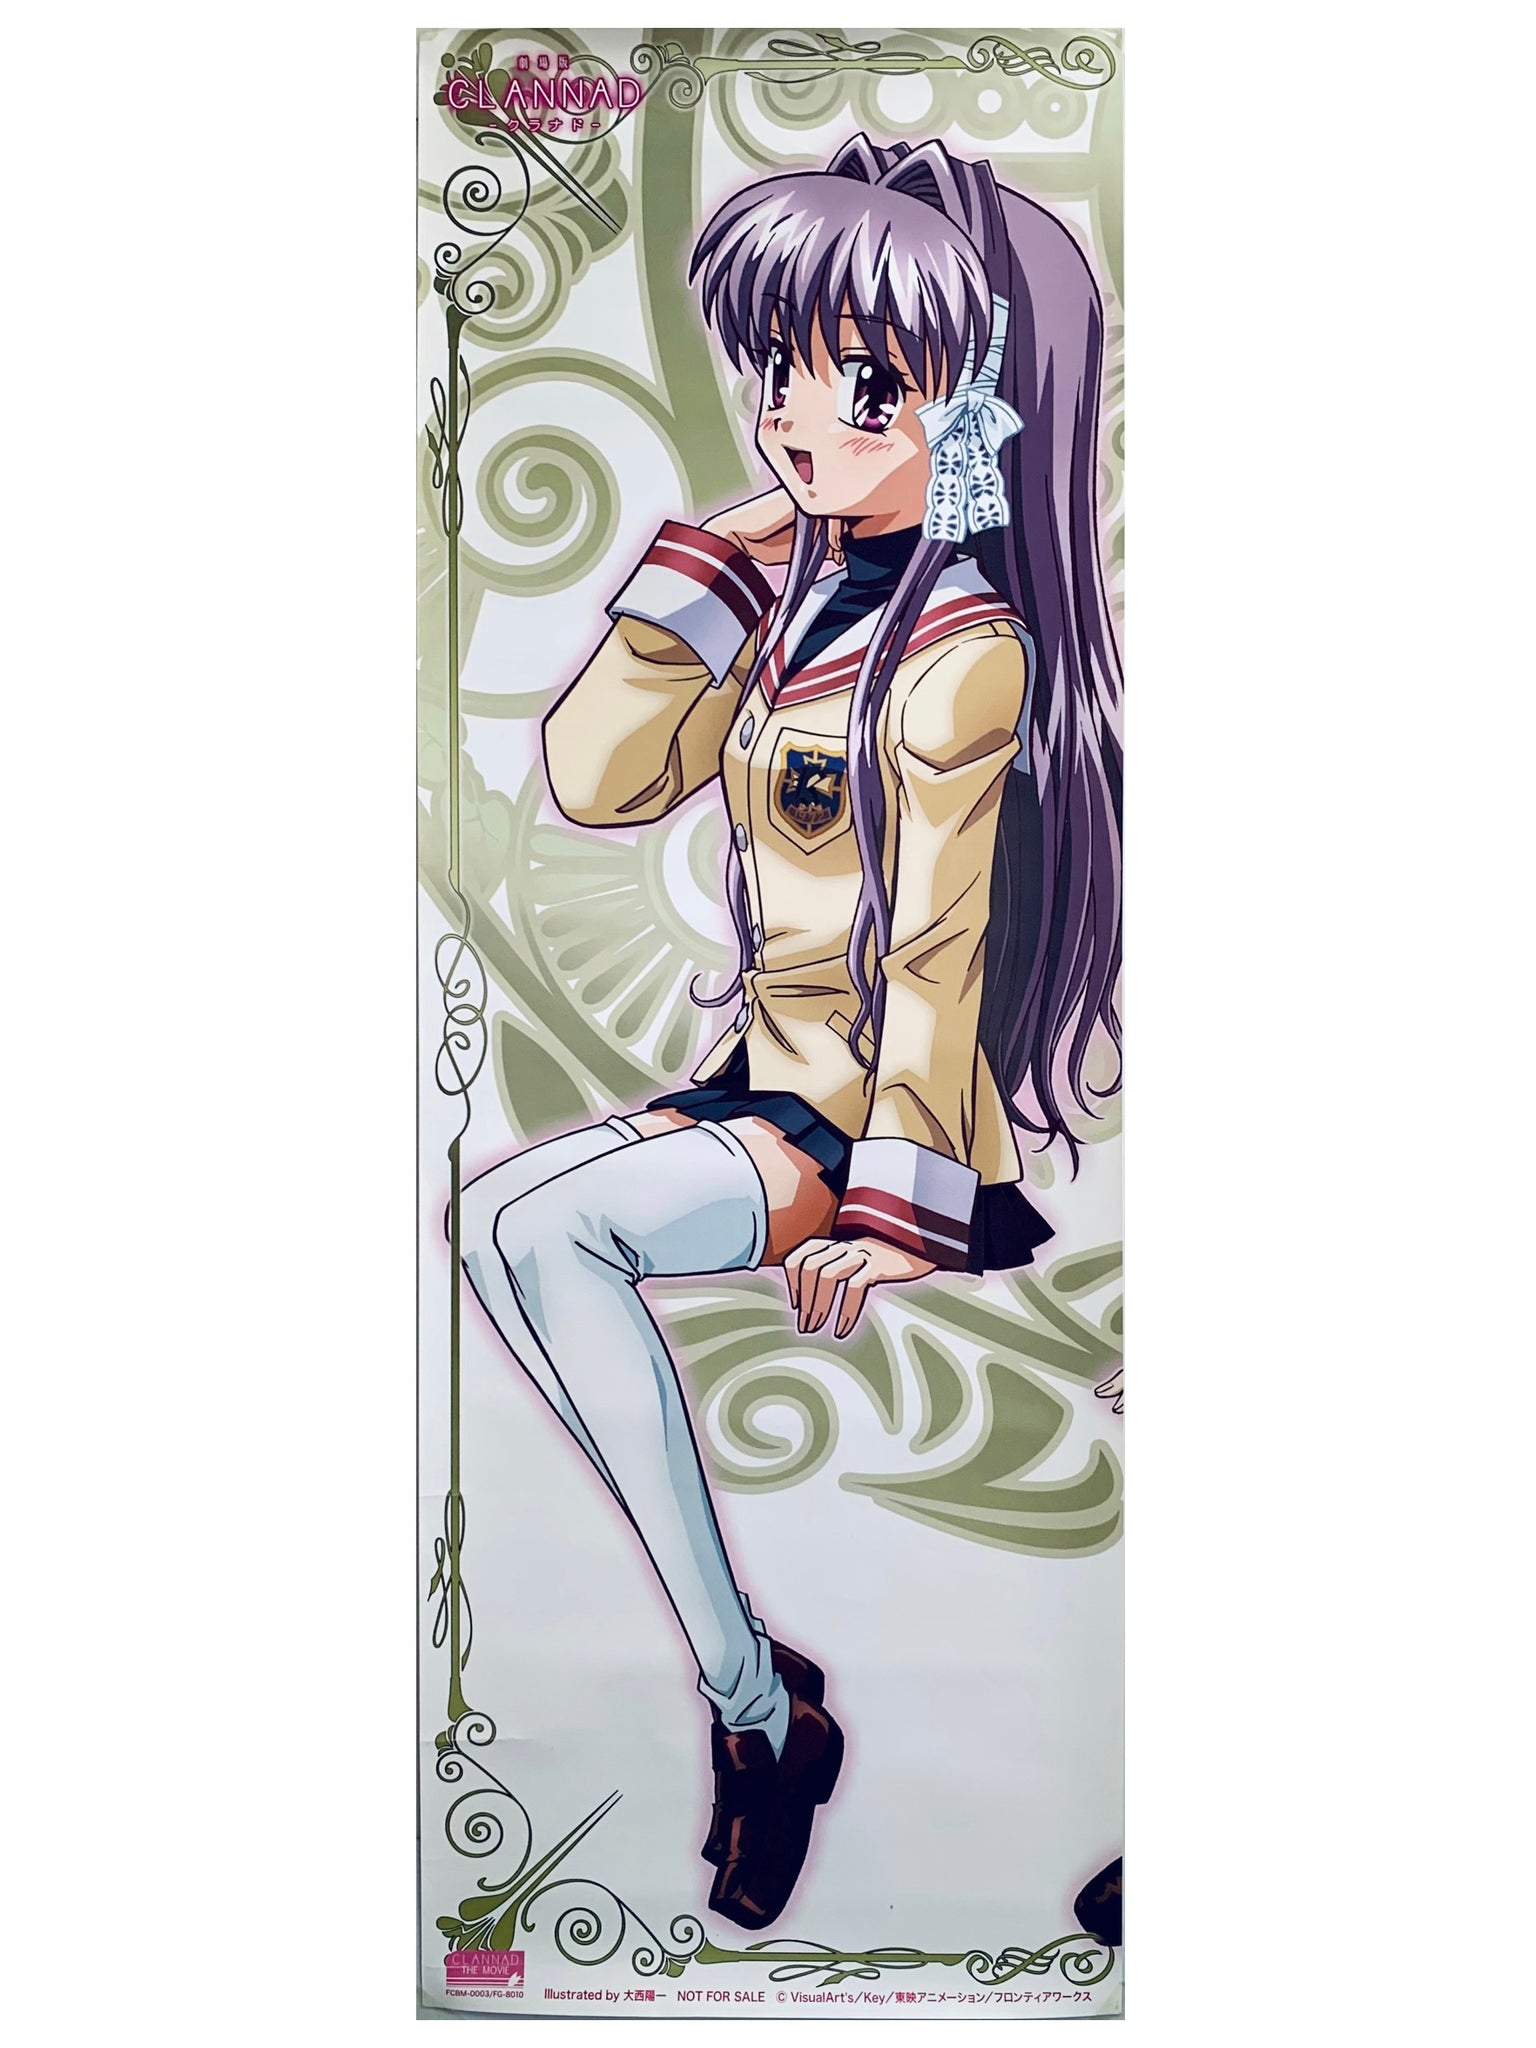 Clannad Magnets for Sale